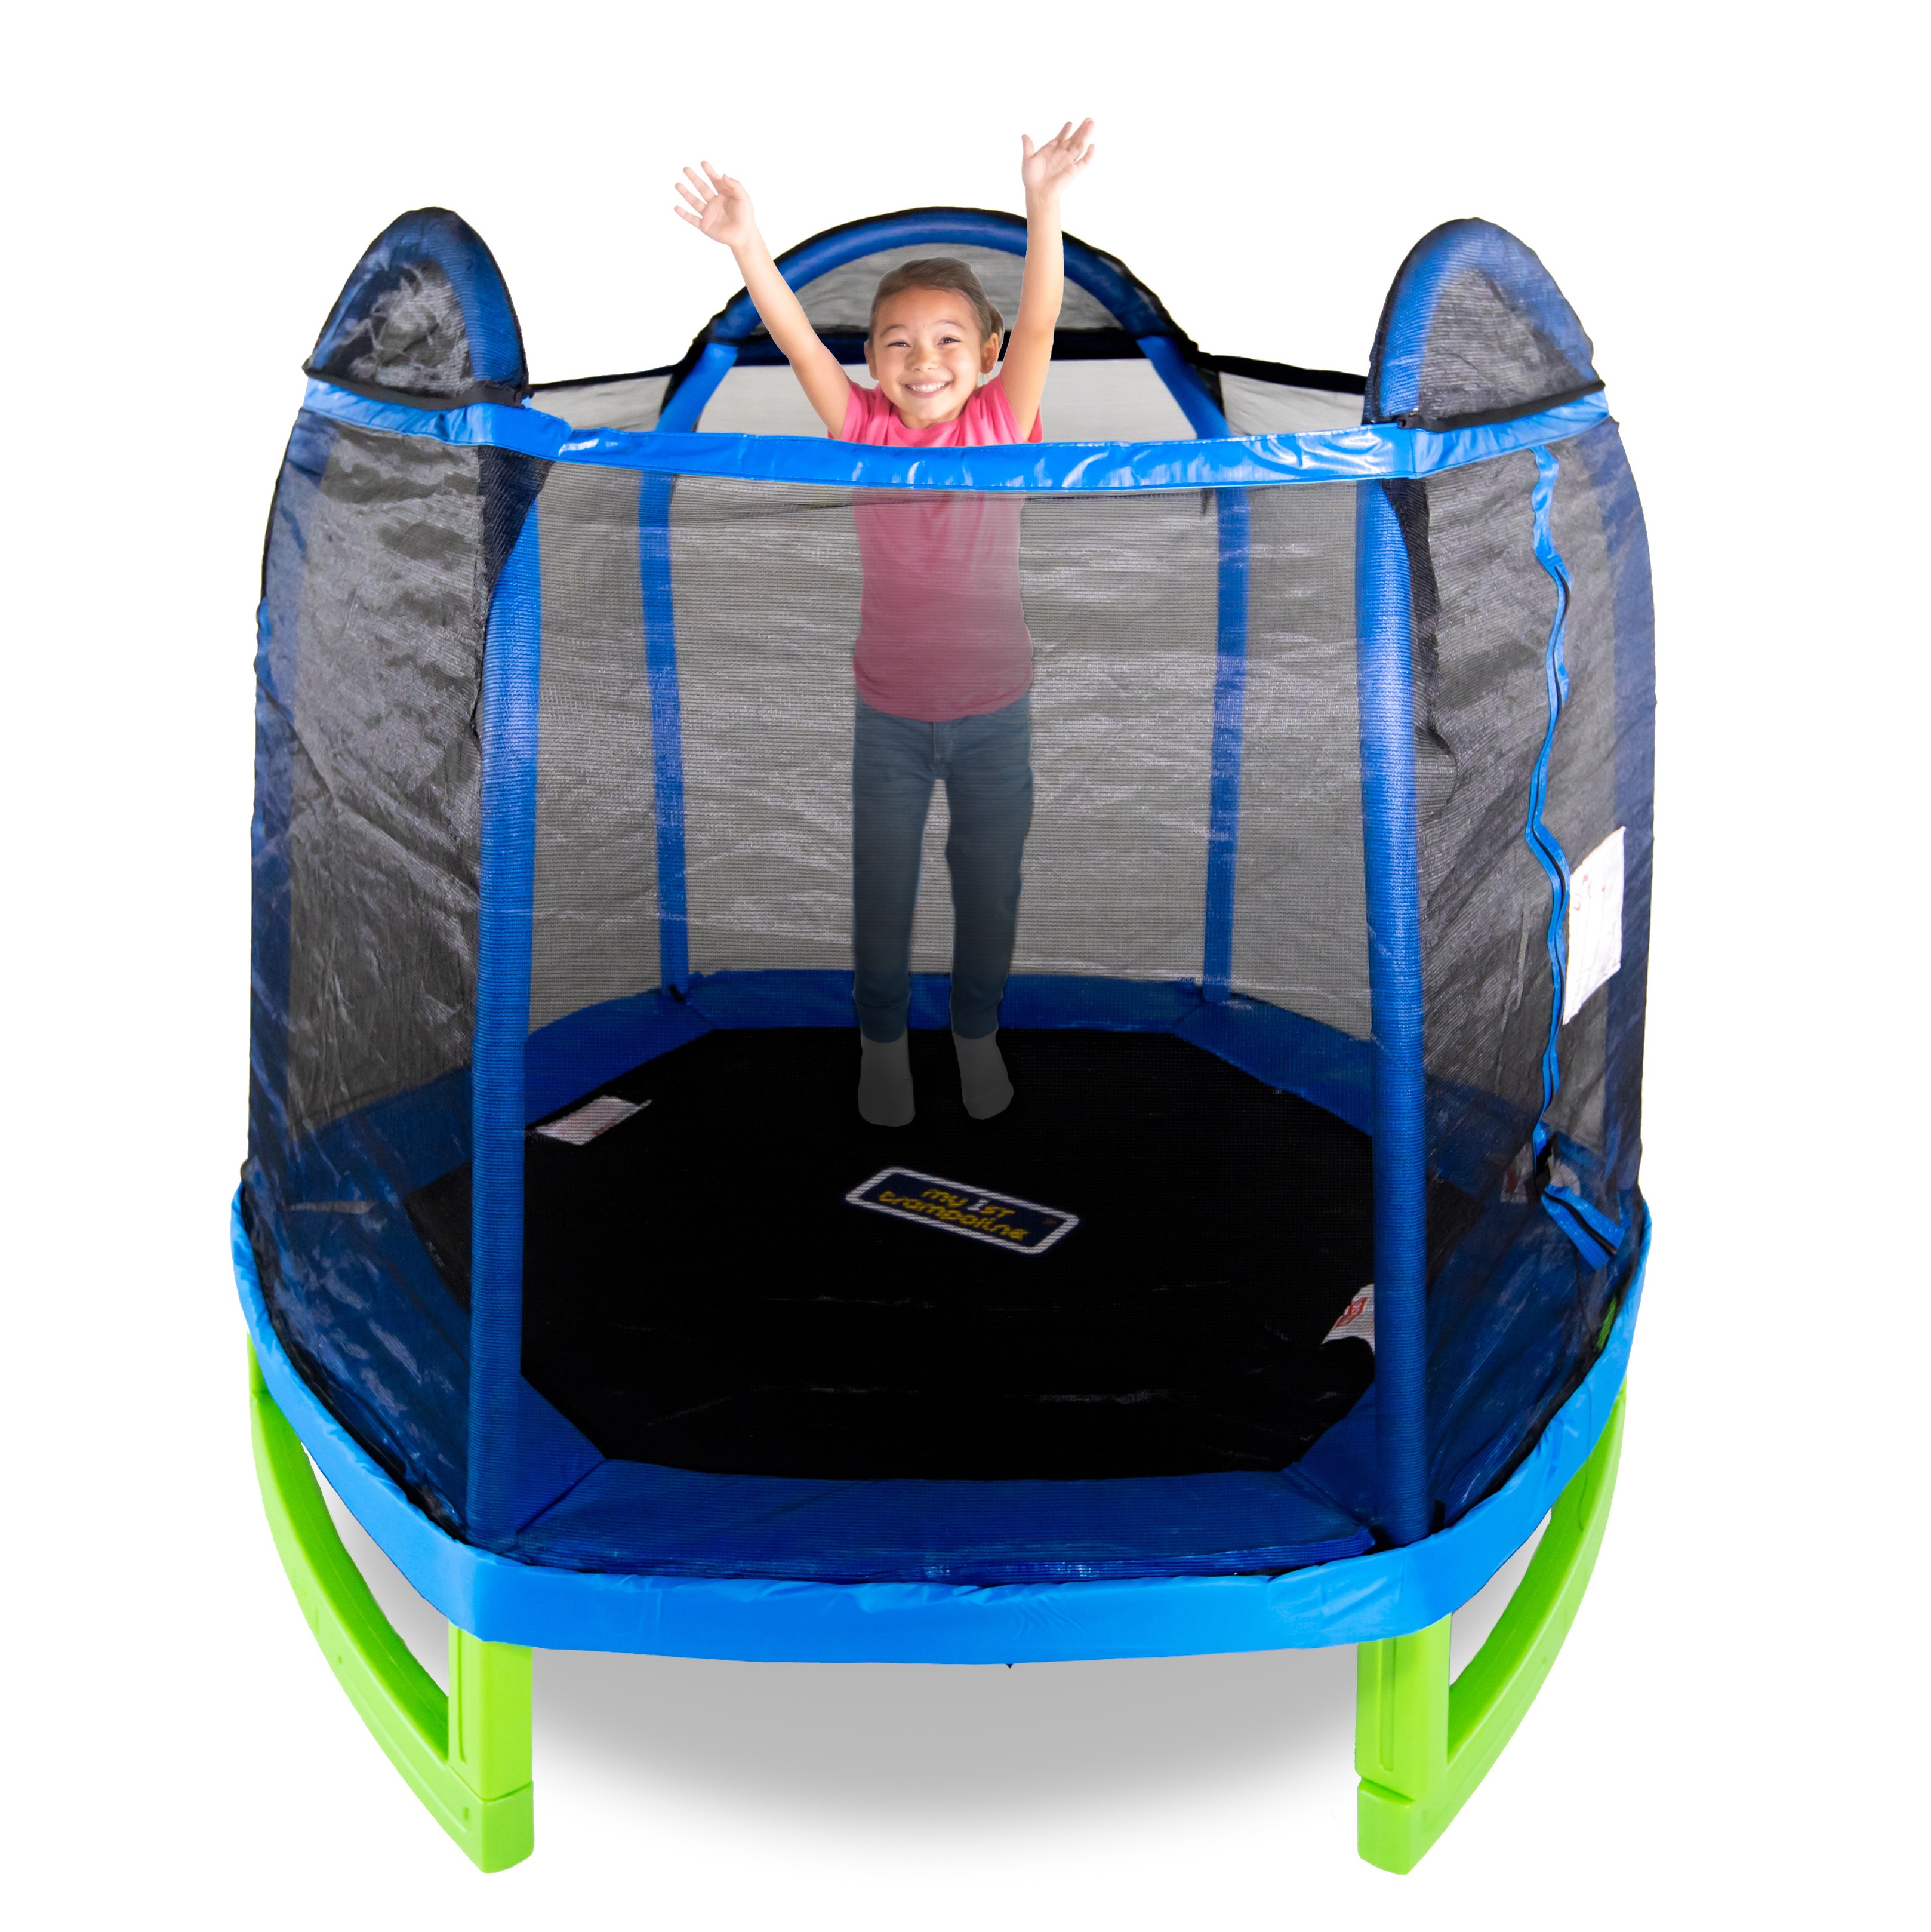 Bounce Pro 7-Foot My First Trampoline Hexagon (Ages 3-10) for Kids, Blue/Green - image 9 of 9